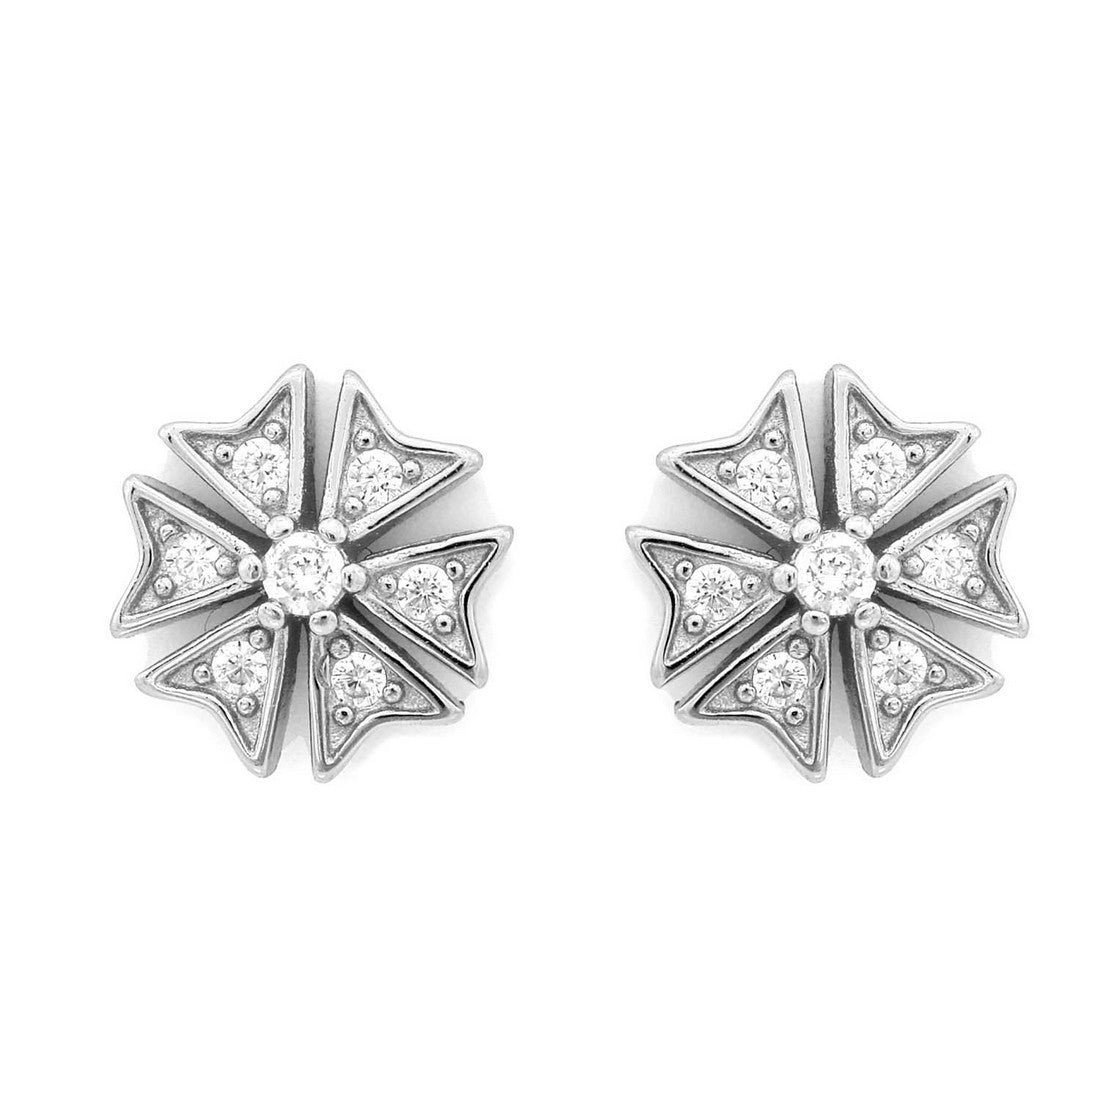 Sparkle and Sass Silver 925 Silver Stud Earrings